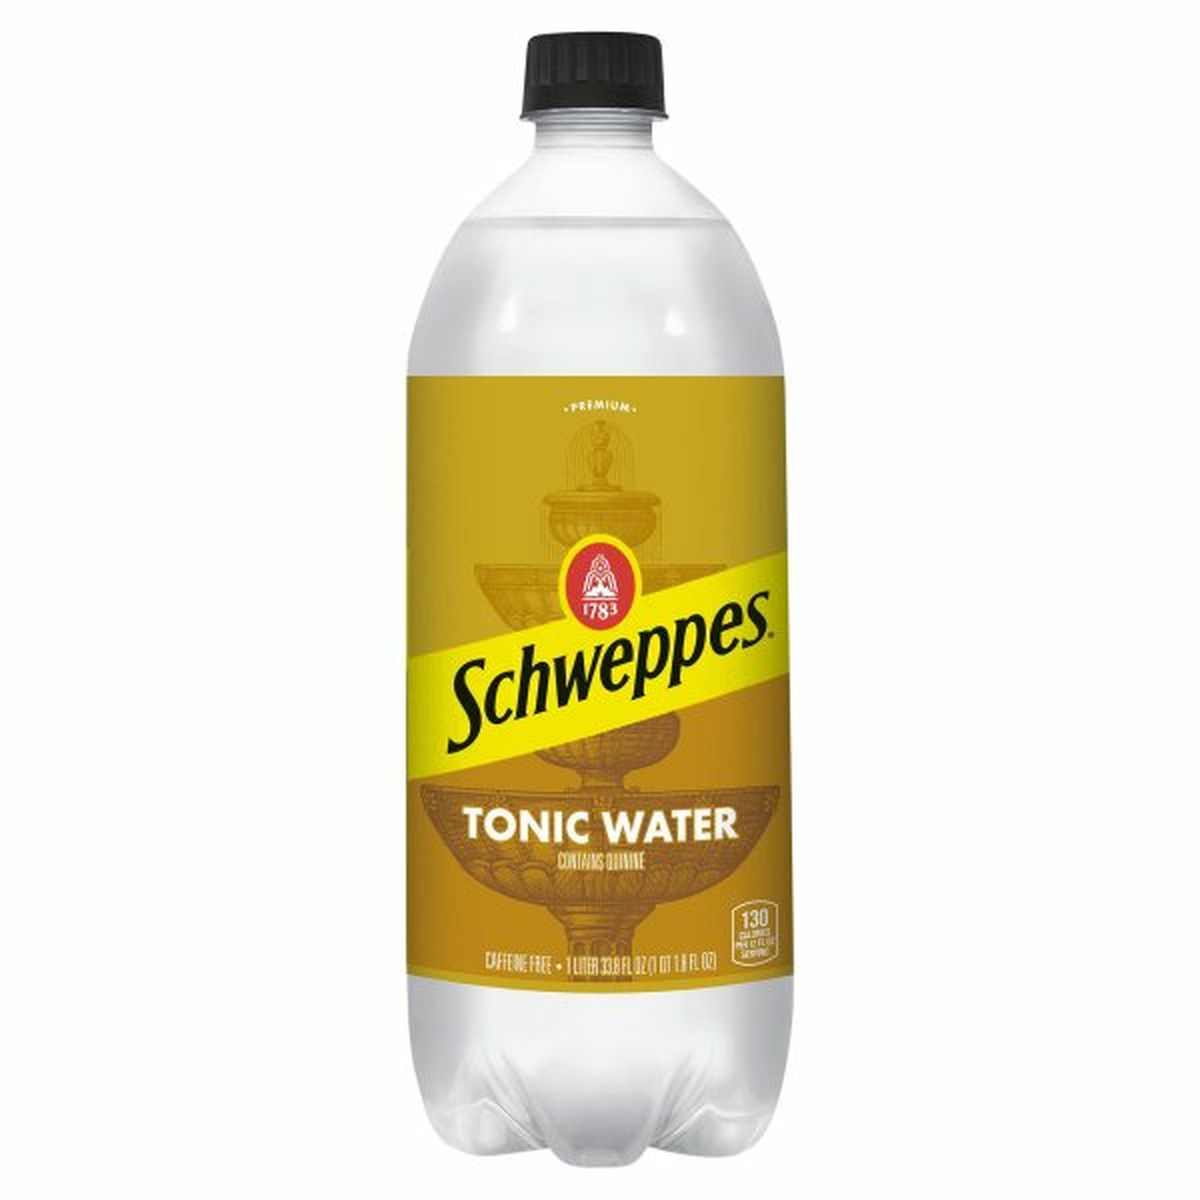 Calories in Schweppes Tonic Water Tonic Water